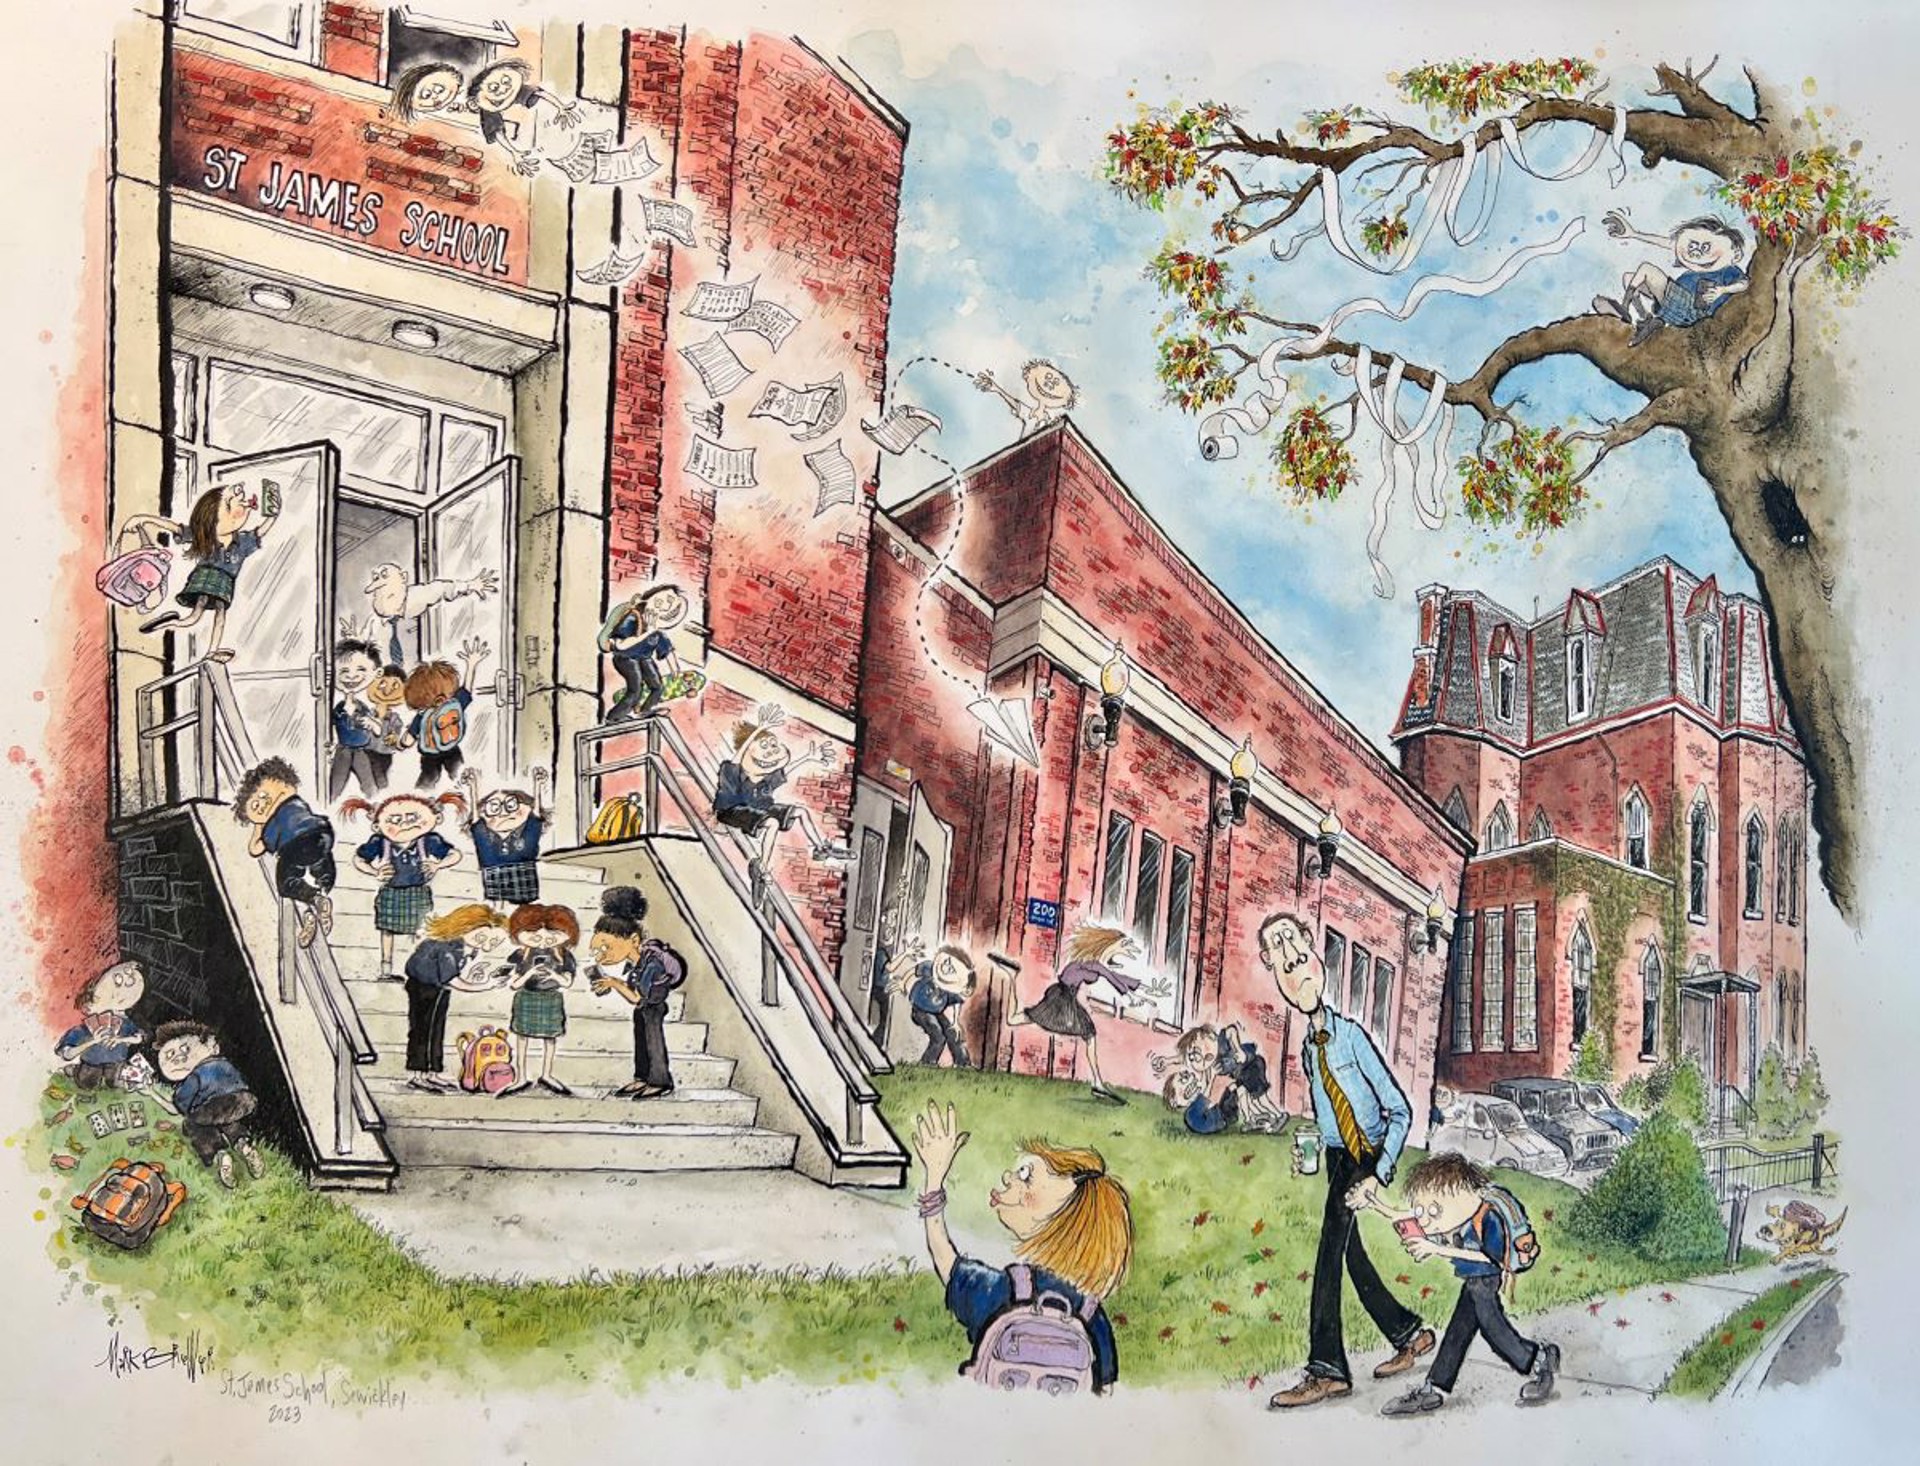 St James School, Sewickley 2023 by Mark Brewer